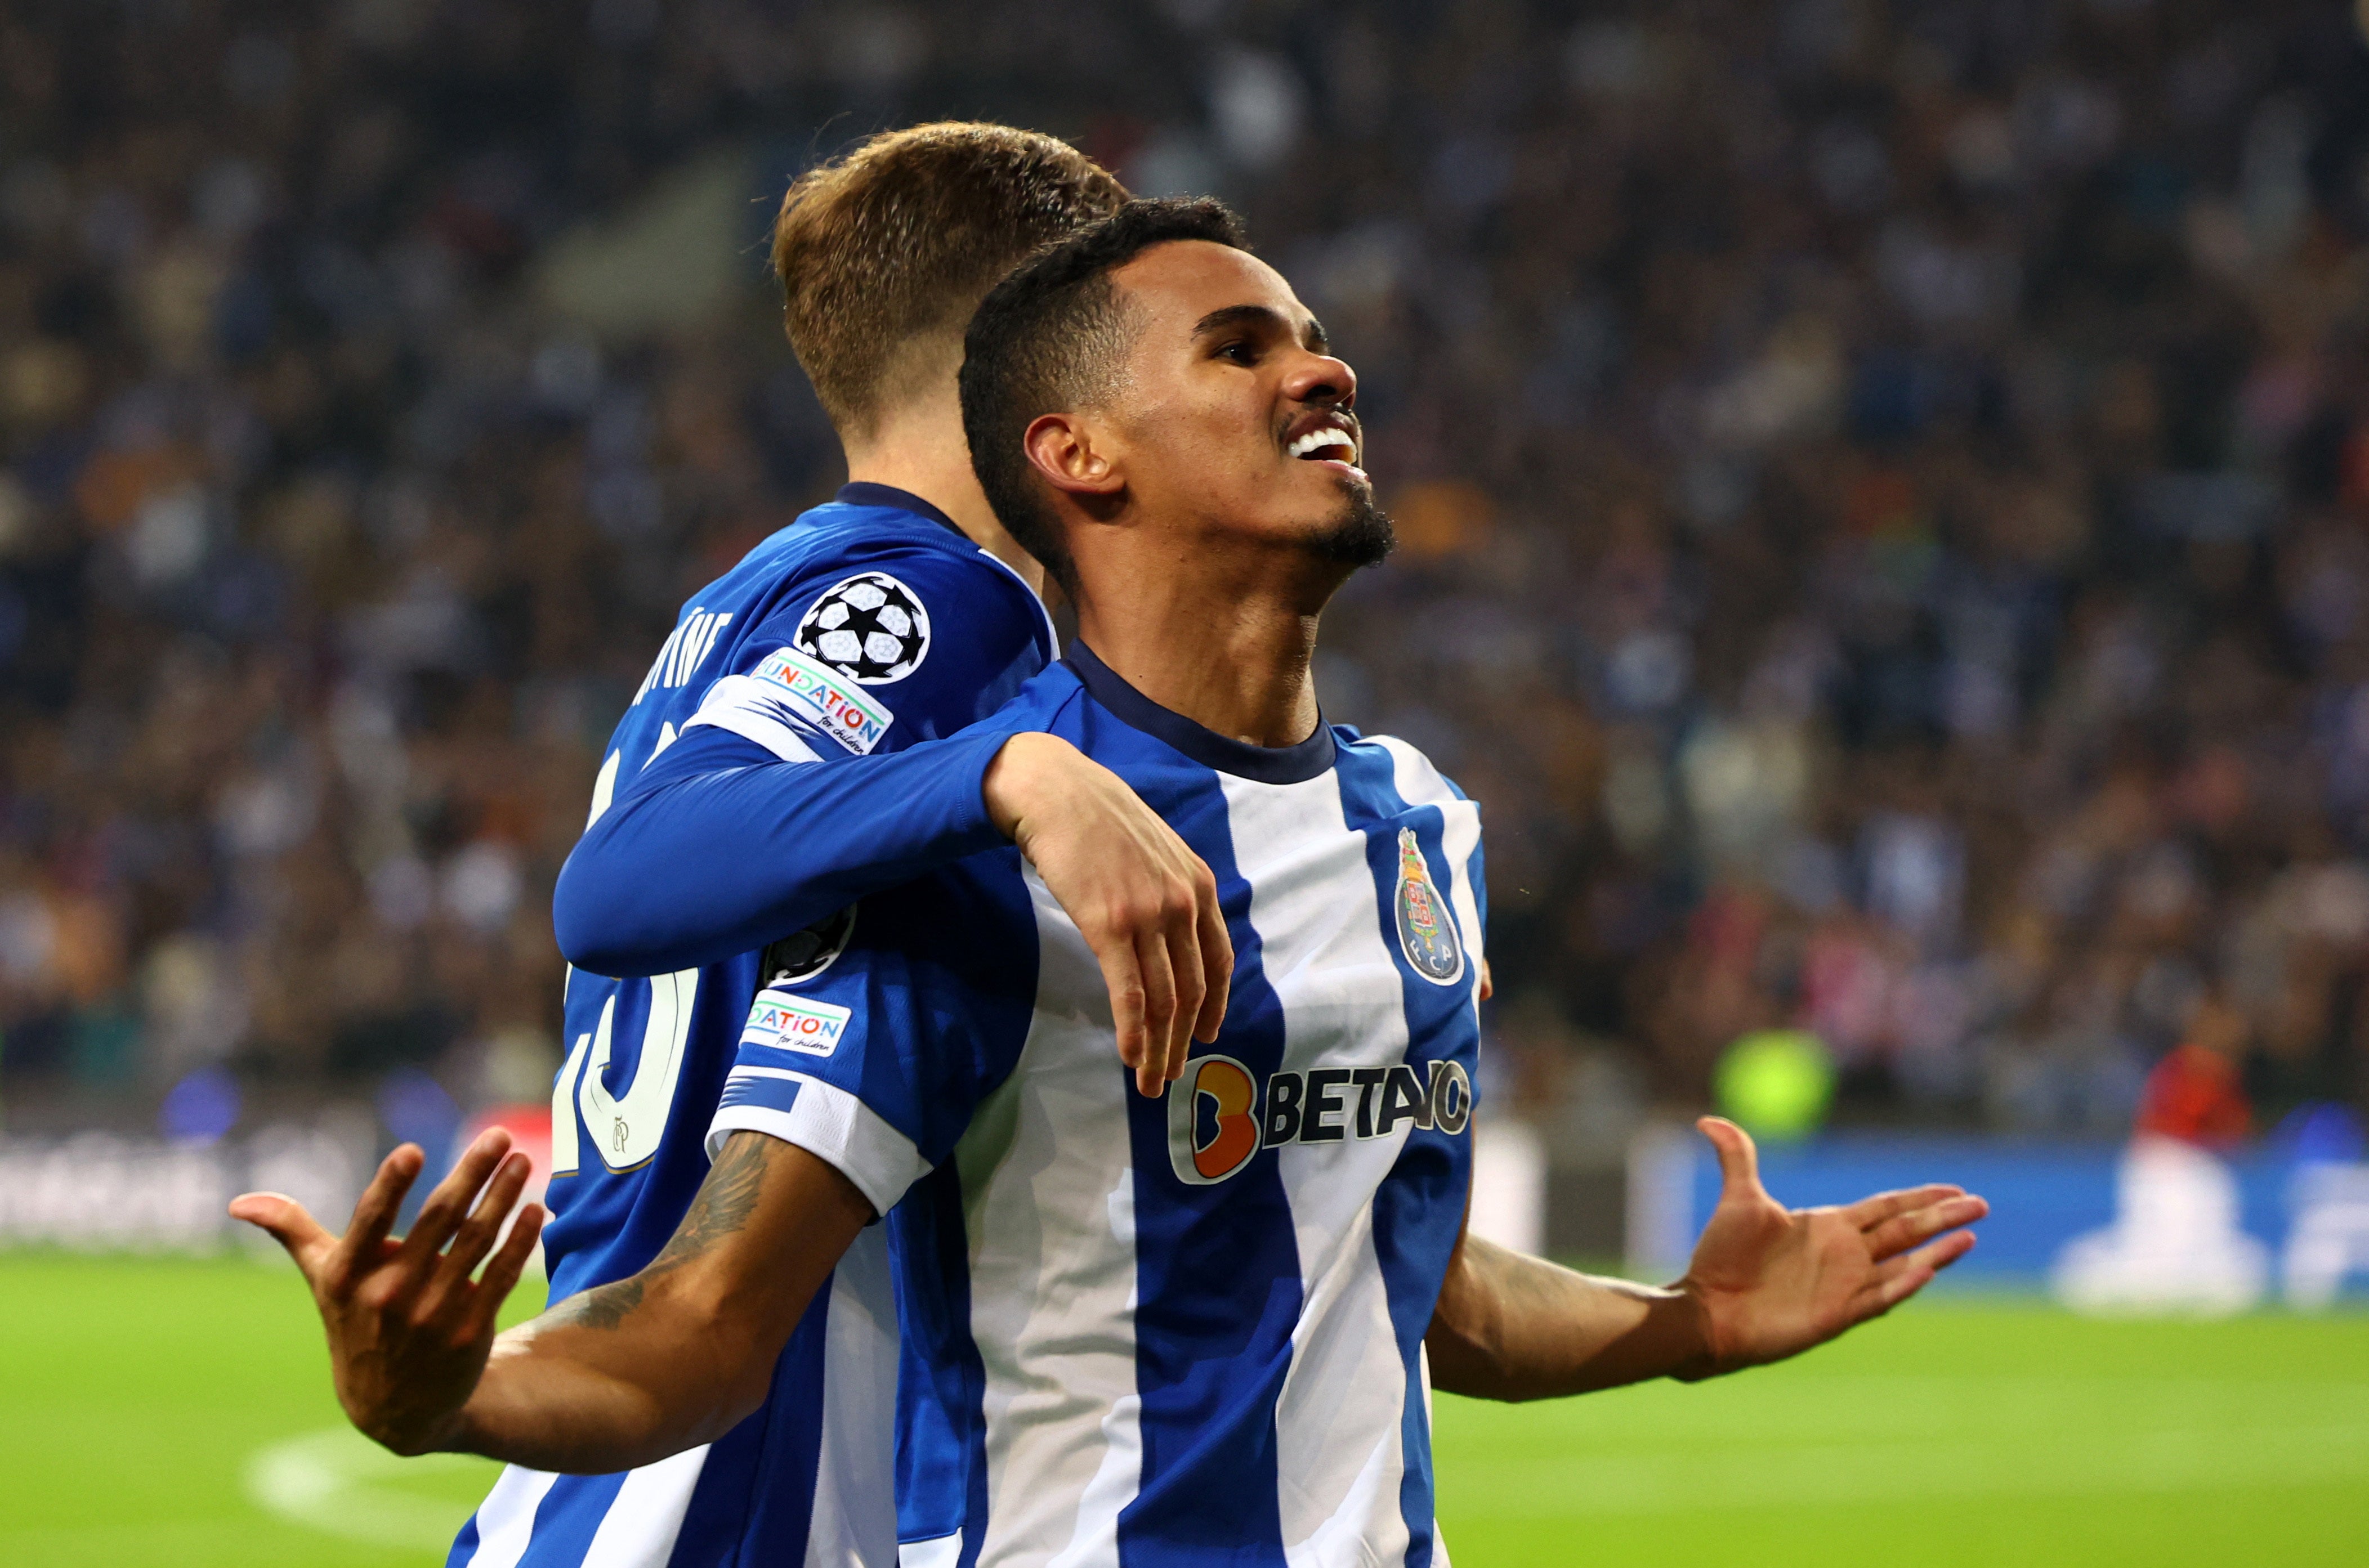 Galeno slotted home a late winner for Porto as Arsenal discovered what Champions League knockout games are all about